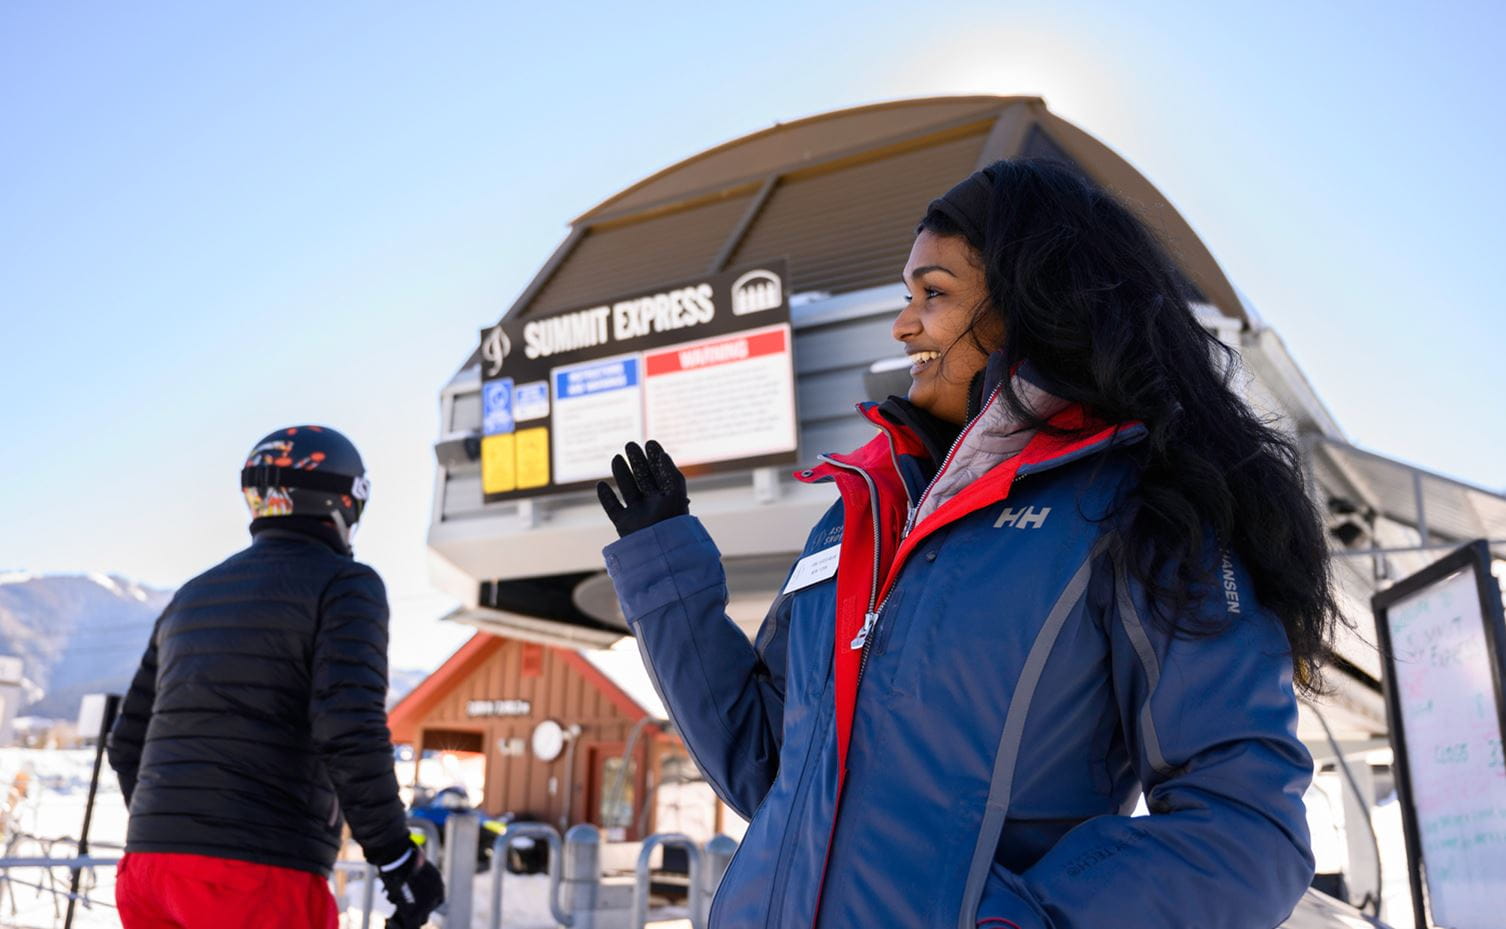 An employee of Aspen Skiing Company greets people at a lift